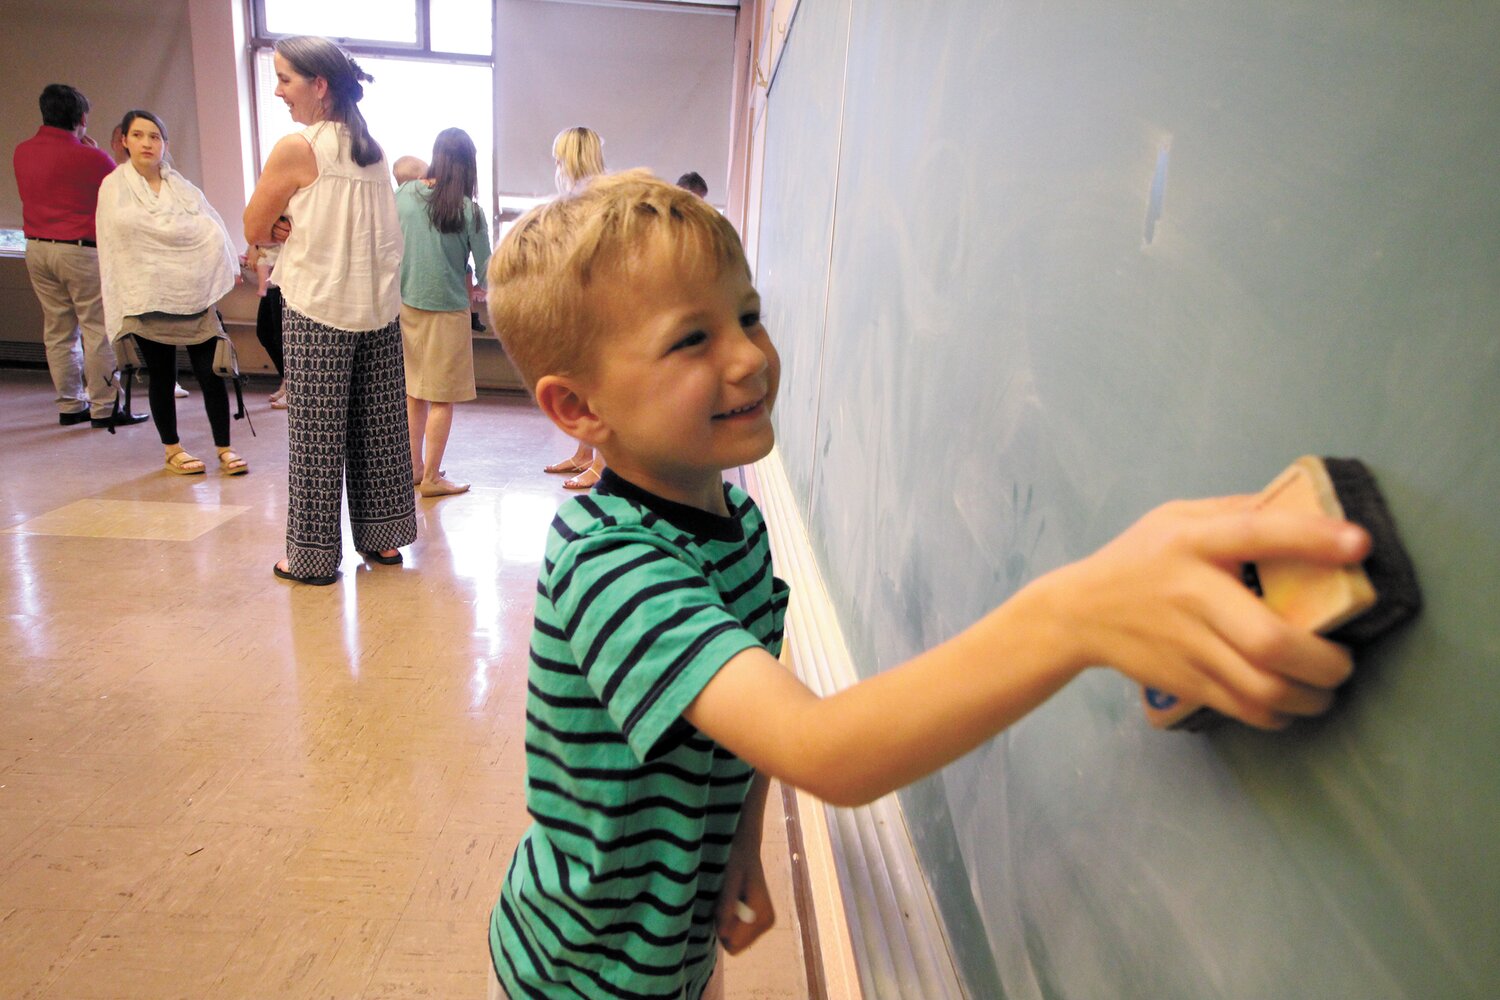 A CLEAN SWEEP: Alian Primeau cleans a board in one of the school’s classrooms.